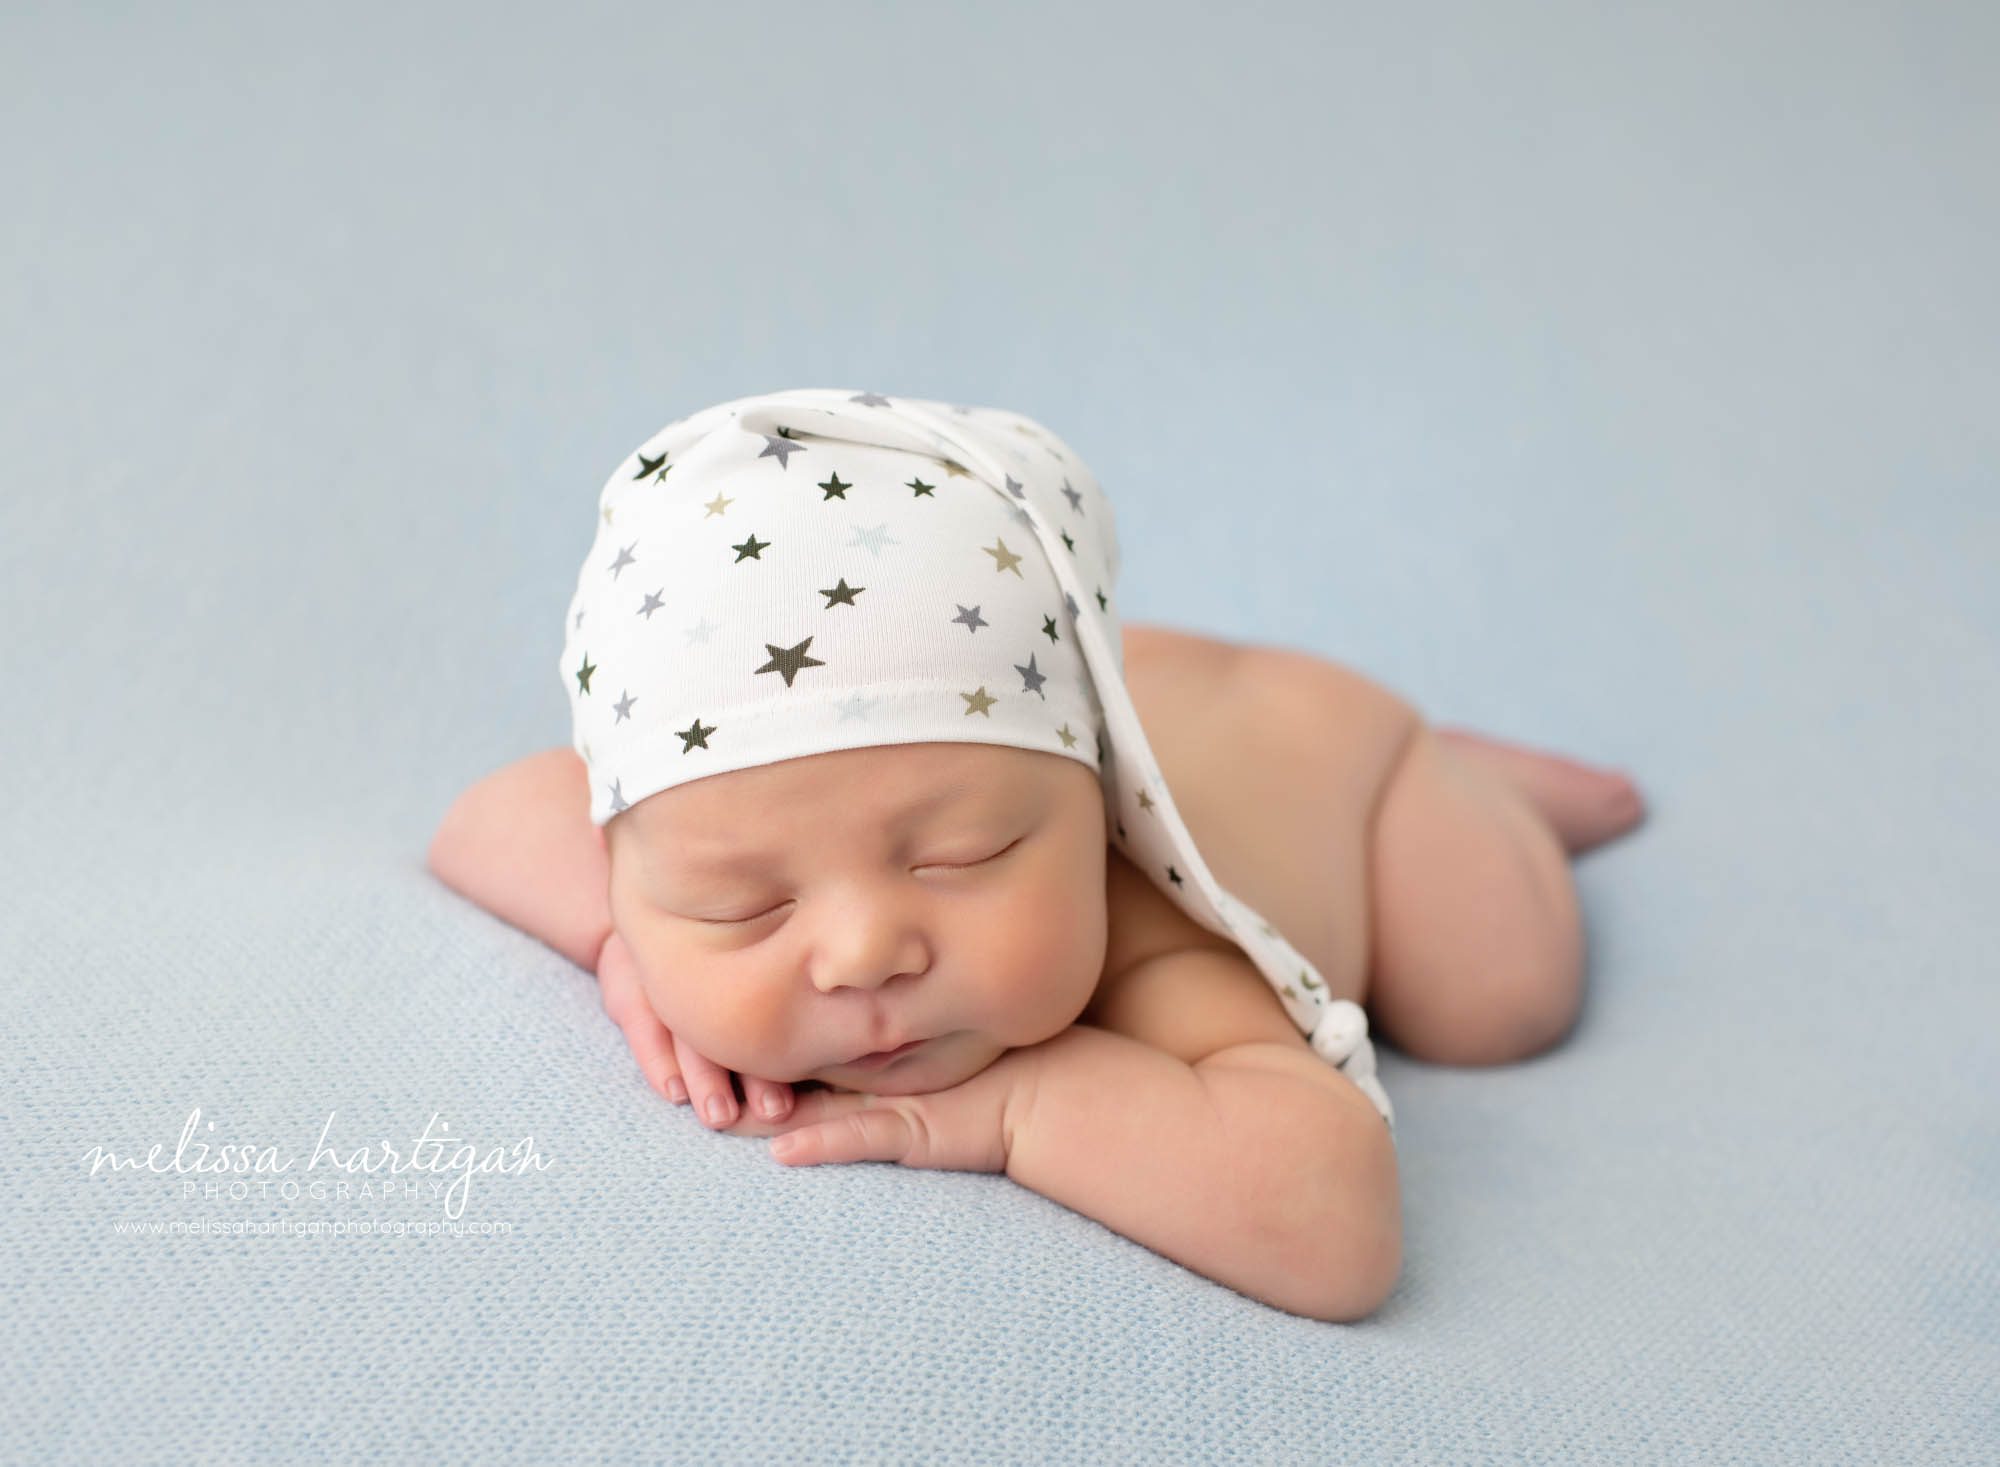 baby boy posed on light blue textured blanket with white and grey and blue sleepy hat with stars